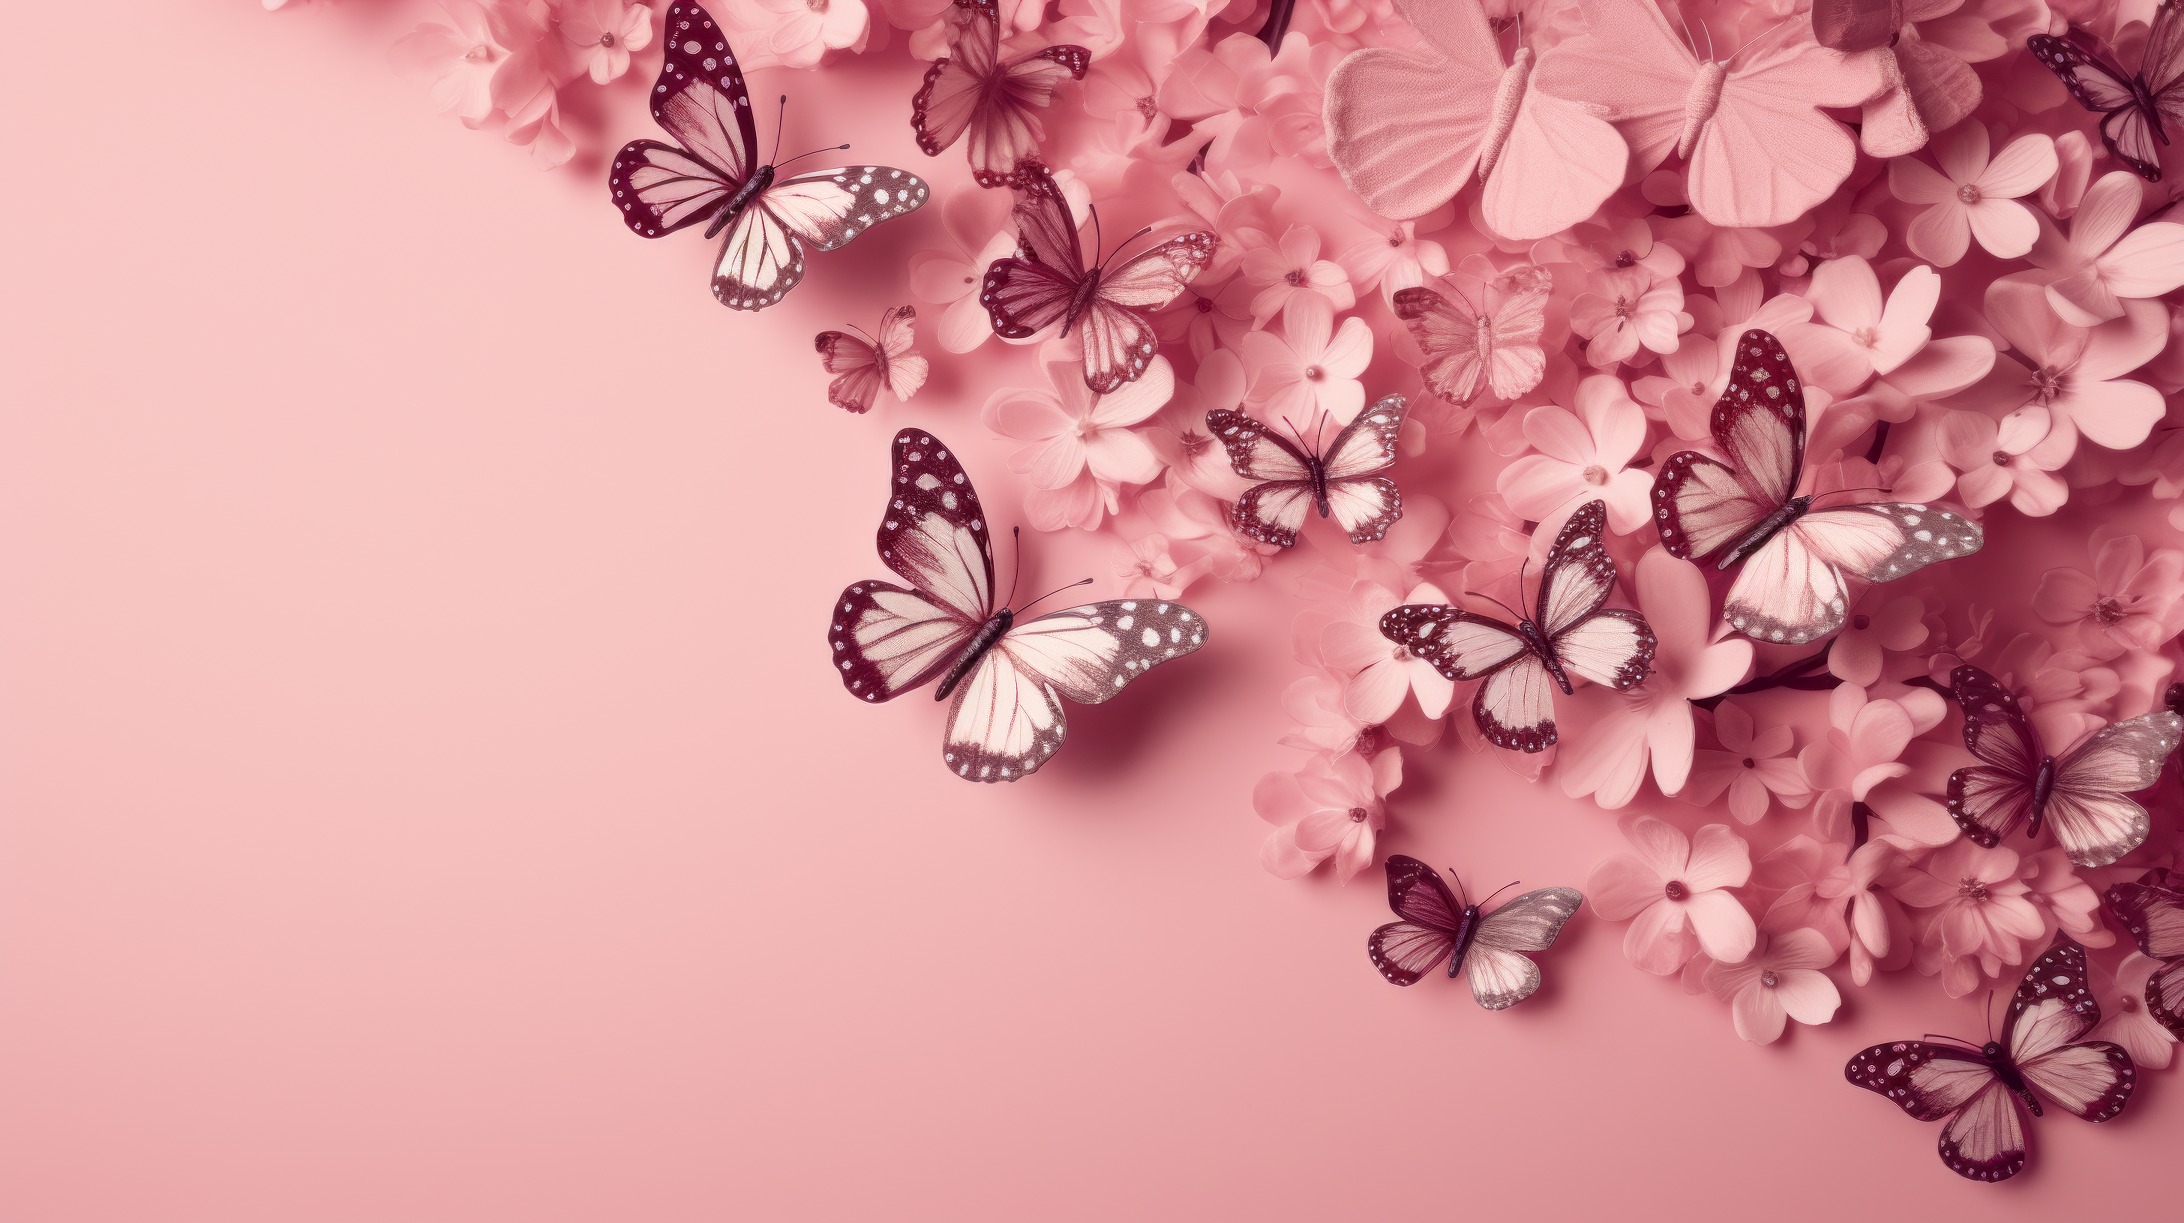 Pink Aesthetic Flowers And Butterflies Wallpaper By Patrika